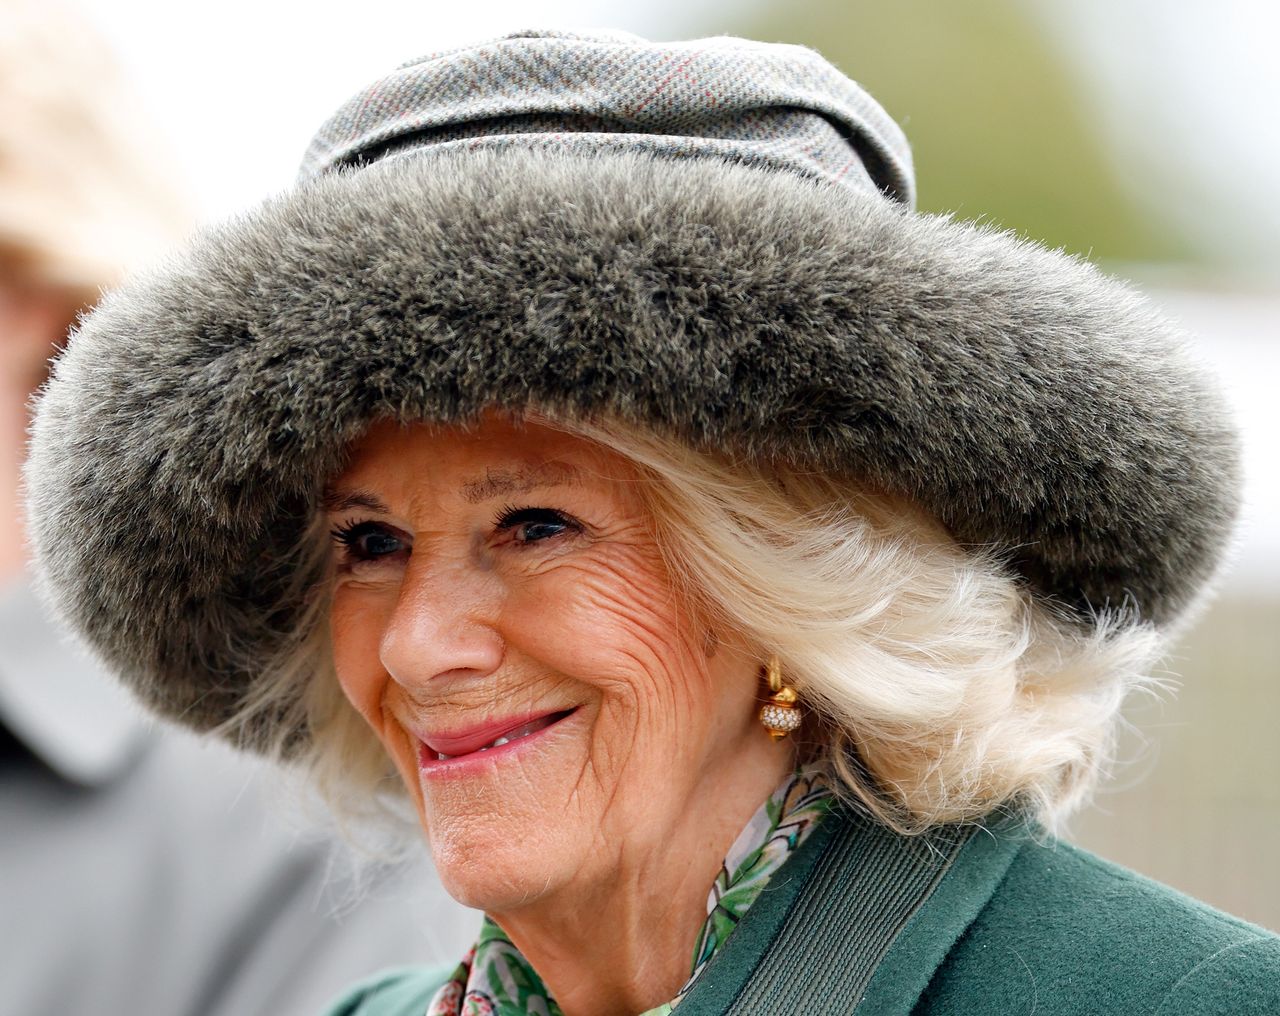 CHELTENHAM, UNITED KINGDOM - MARCH 13: (EMBARGOED FOR PUBLICATION IN UK NEWSPAPERS UNTIL 24 HOURS AFTER CREATE DATE AND TIME) Queen Camilla attends day 2 'Style Wednesday' of the Cheltenham Festival at Cheltenham Racecourse on March 13, 2024 in Cheltenham, England. This year organisers at the Cheltenham Festival have decided to re-style the traditional Ladies Day Meet calling it Style Wednesday. (Photo by Max Mumby/Indigo/Getty Images)
Max Mumby/Indigo